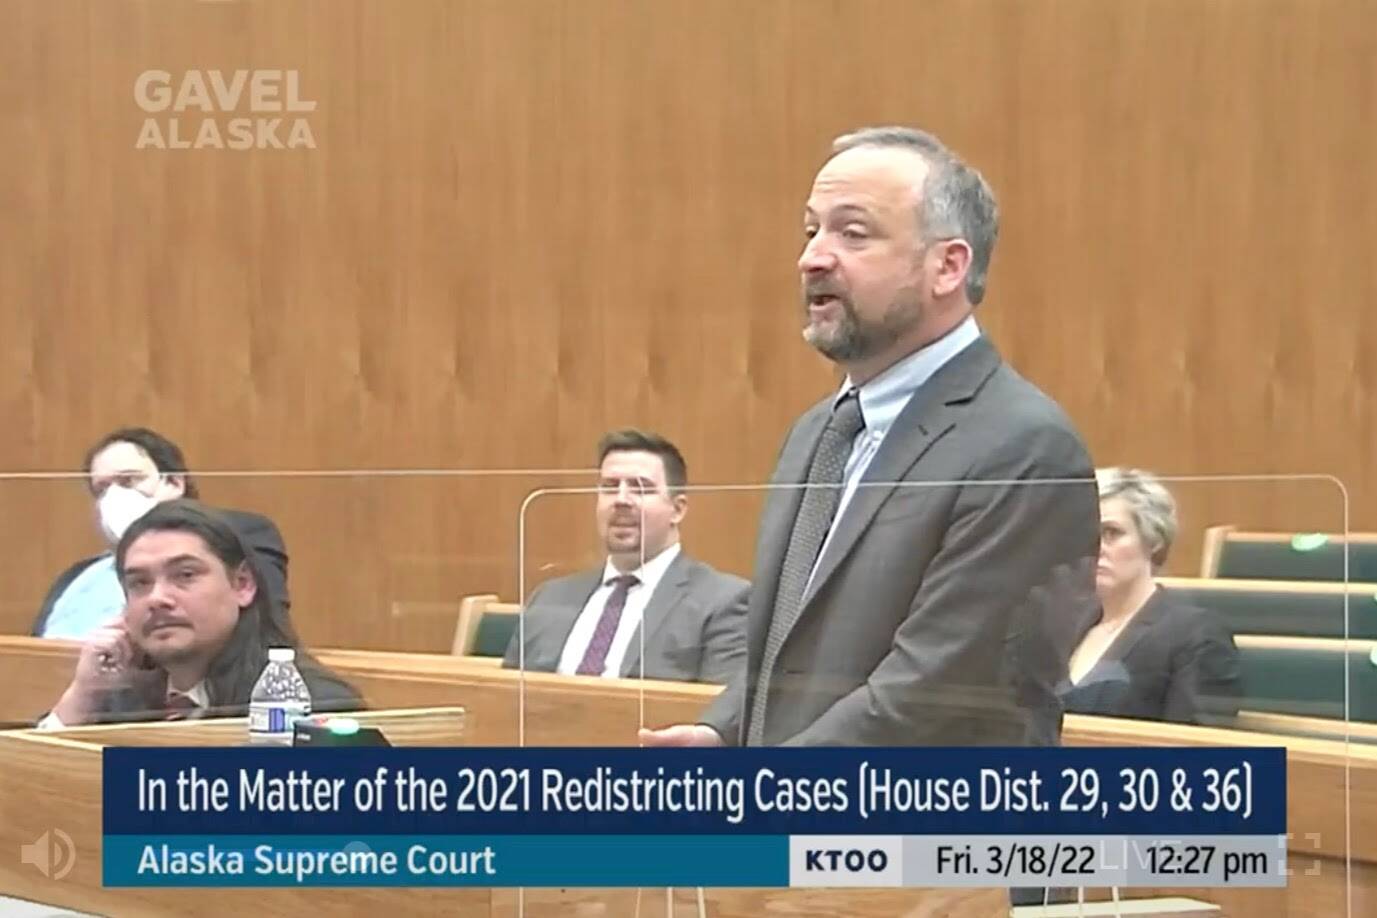 Attorney for the State of Alaska Matthew Singer defends the Alaska Redistricting Board to the Alaska Supreme Court on Friday, March 18, 2022. The Court will return a decision on the state’s new electoral districts by April 1. (Screenshot)